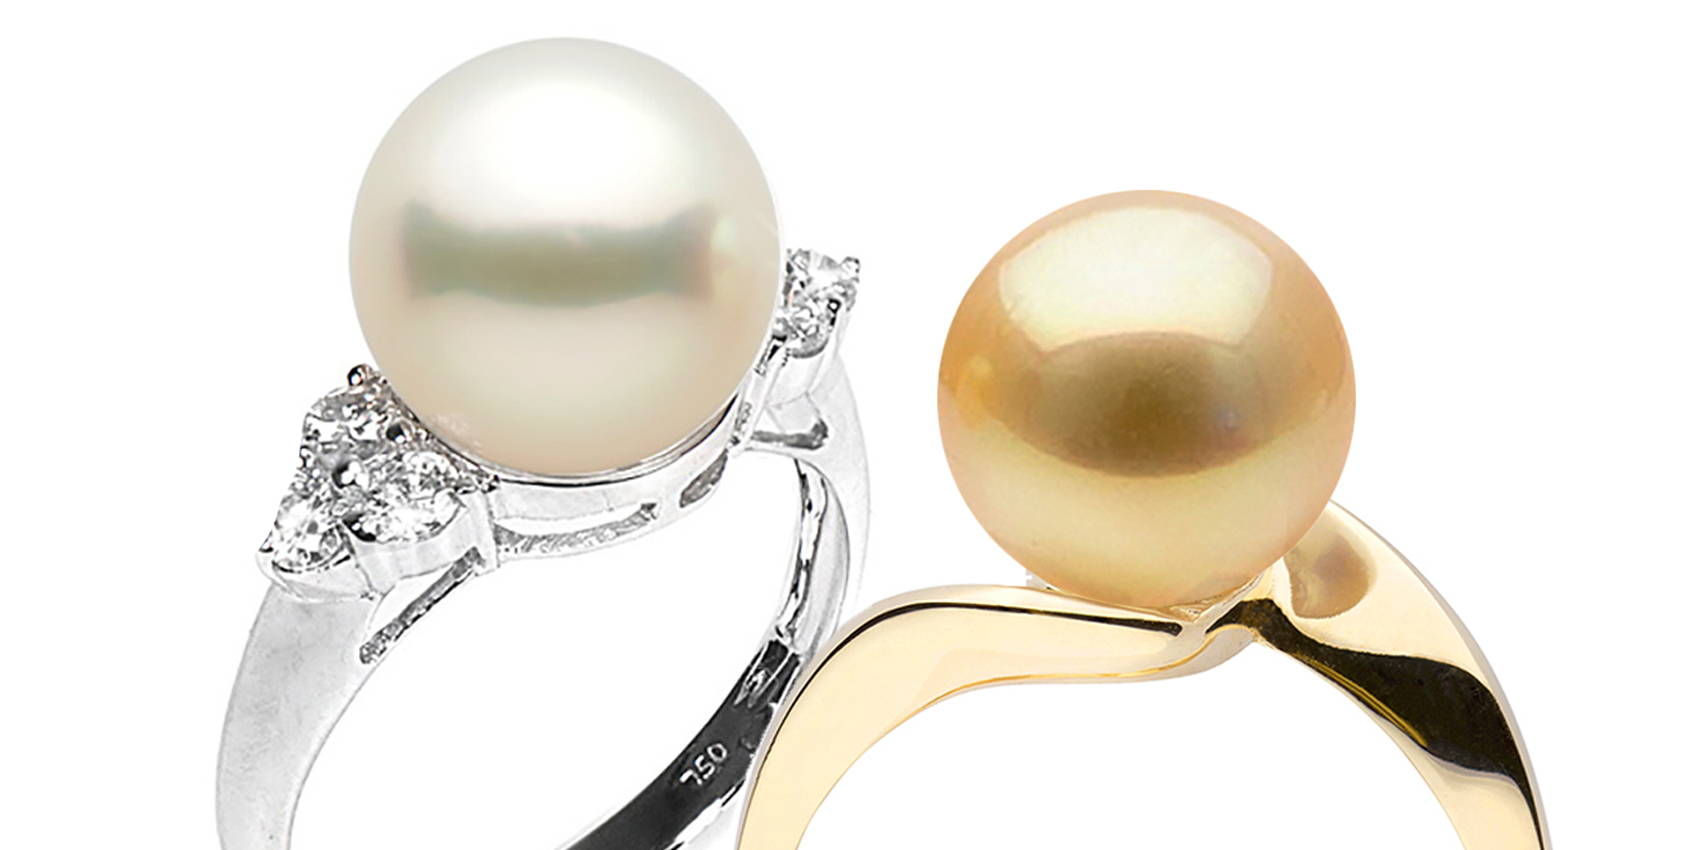 We always say: A Pearl Ring is never, ever an ordinary ring ... And that goes double for a South Seas pearl ring! Whether you're dazzling with diamond accents, or prefer a sleek, minimalist solitaire style, Pure Pearls offers something for every taste and budget. All of our South Sea Pearl Rings are chosen from our AAA Quality Only lots, and mounted in your choice of solid 14K and 18K Gold. Many of the designs you see here are exclusive to PurePearls.com and hand-cast by our goldsmith to order, here at our Los Angeles, CA workshop.